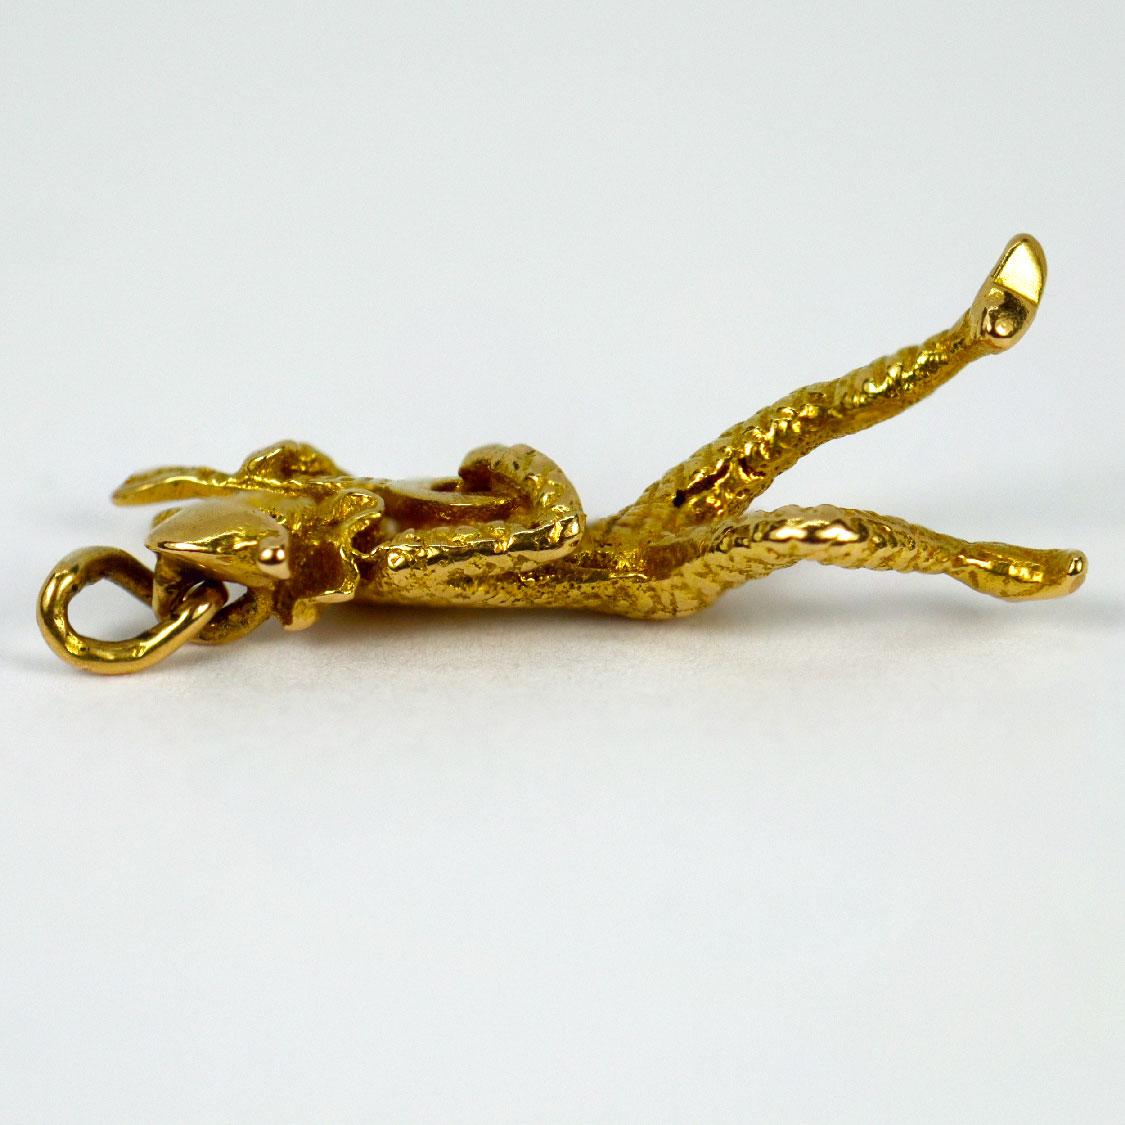 An 18 karat (18K) yellow gold charm pendant designed as a Harlequin figure from the Commedia dell’Arte playing a lute. Stamped with the owl mark for French import and 18 karat gold.

Dimensions: 2.7 x 0.8 x 0.8 cm (not including jump ring)
Weight: